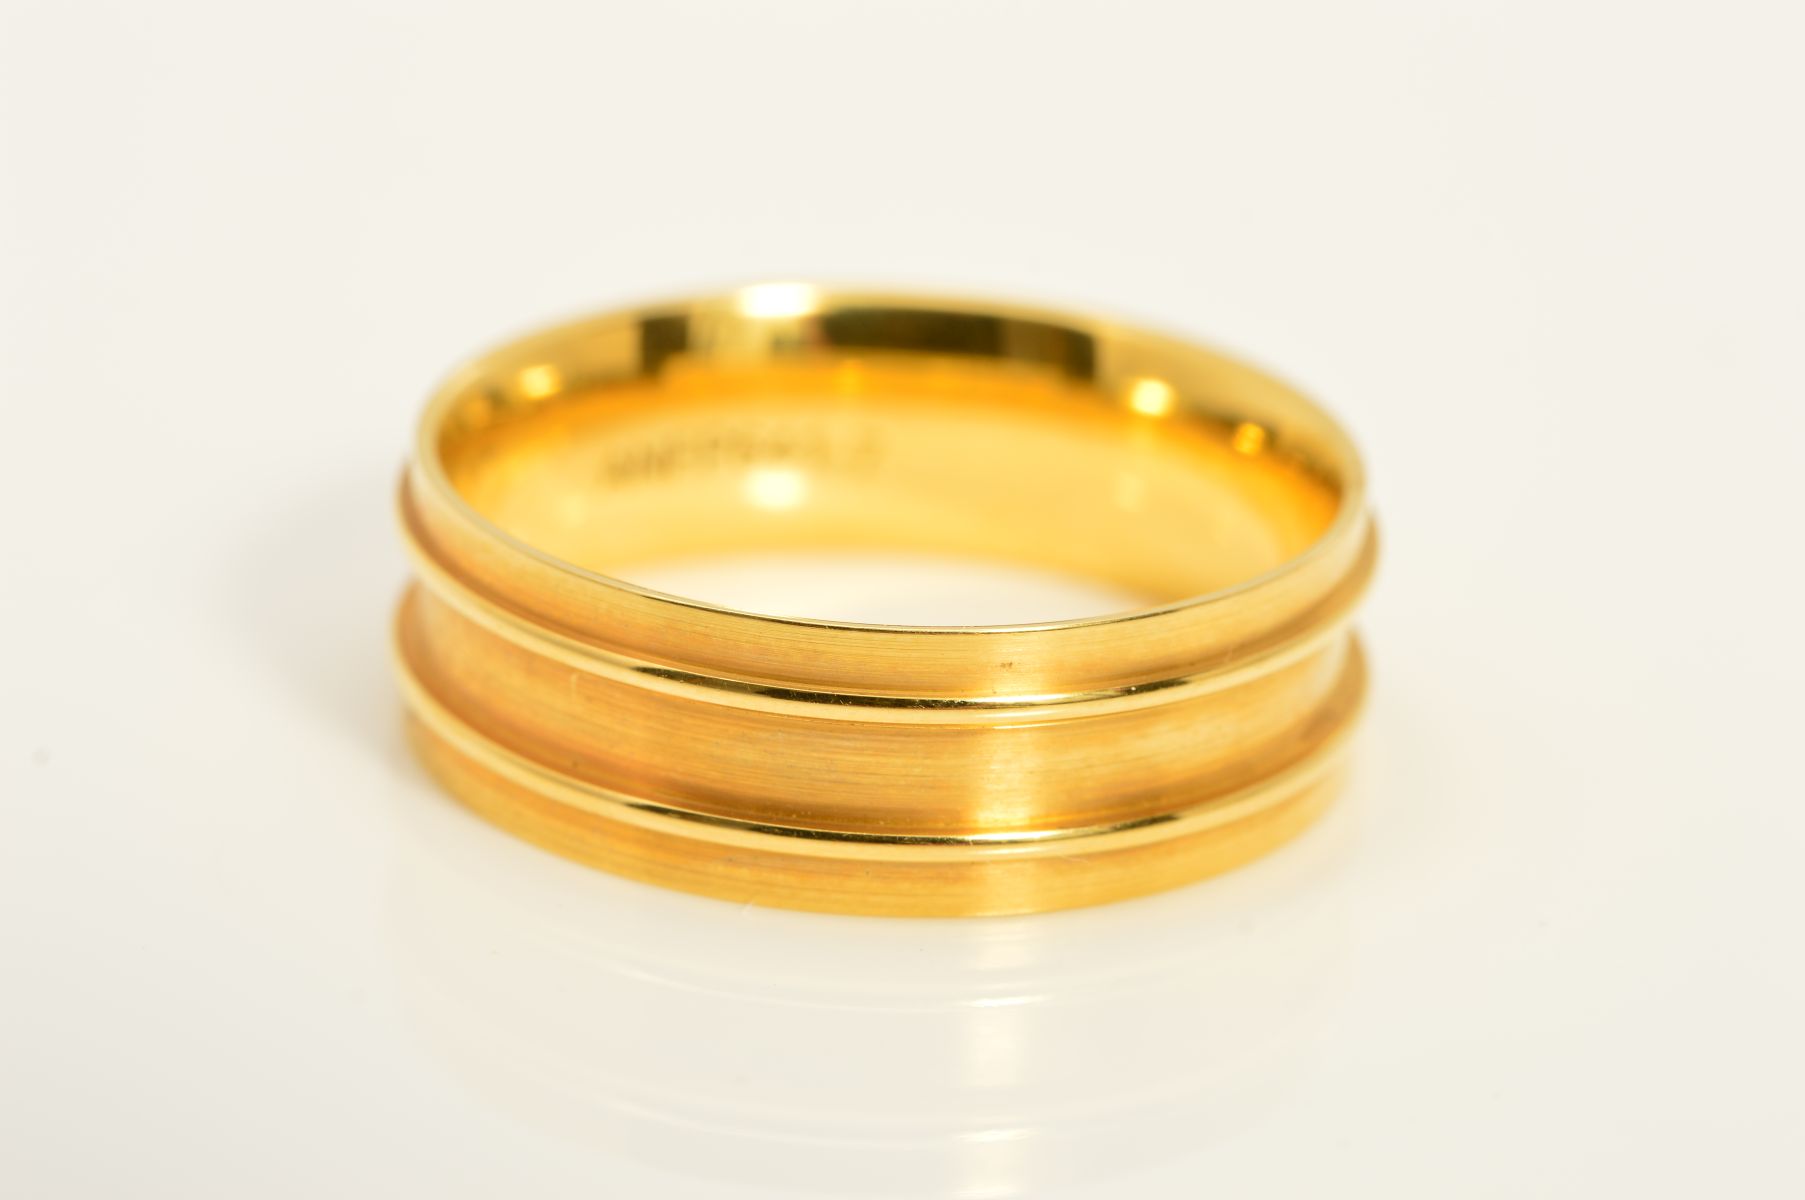 A MODERN 18CT YELLOW GOLD FLAT SECTION WEDDING BAND, with embossed line detail, measuring